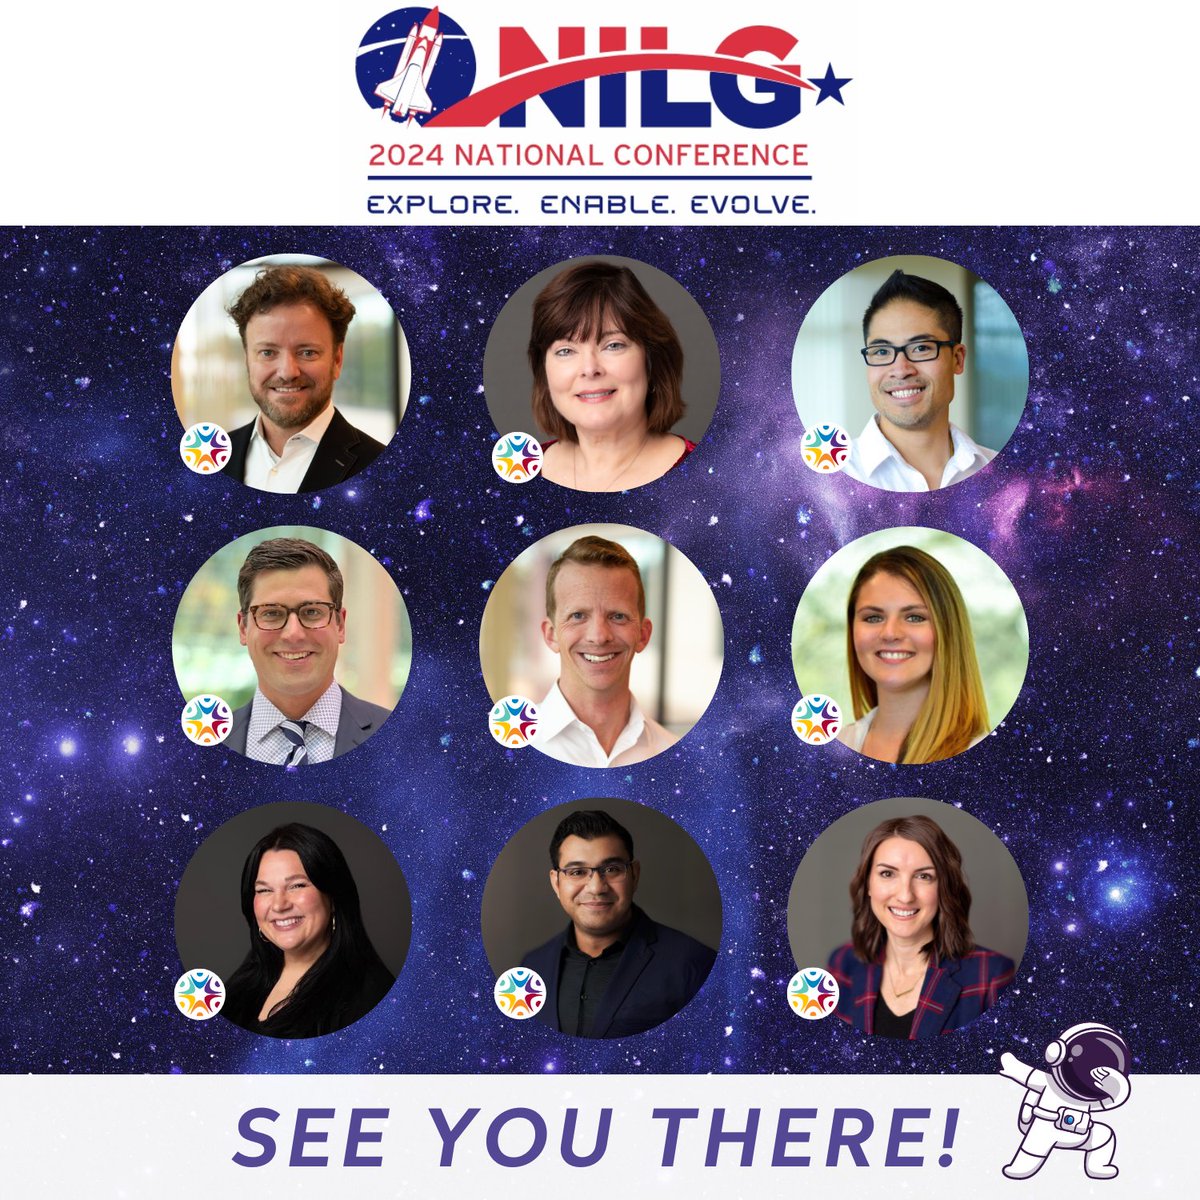 Explore, Enable, Evolve. at #NILG24. Our experts join this dynamic agenda, offering a variety of sessions to help drive your success. Register by 5/24/24 for early bird discount hubs.la/Q02tFRhj0
#NILG24 #EEO #HumanResources #AffirmativeAction #HRConference